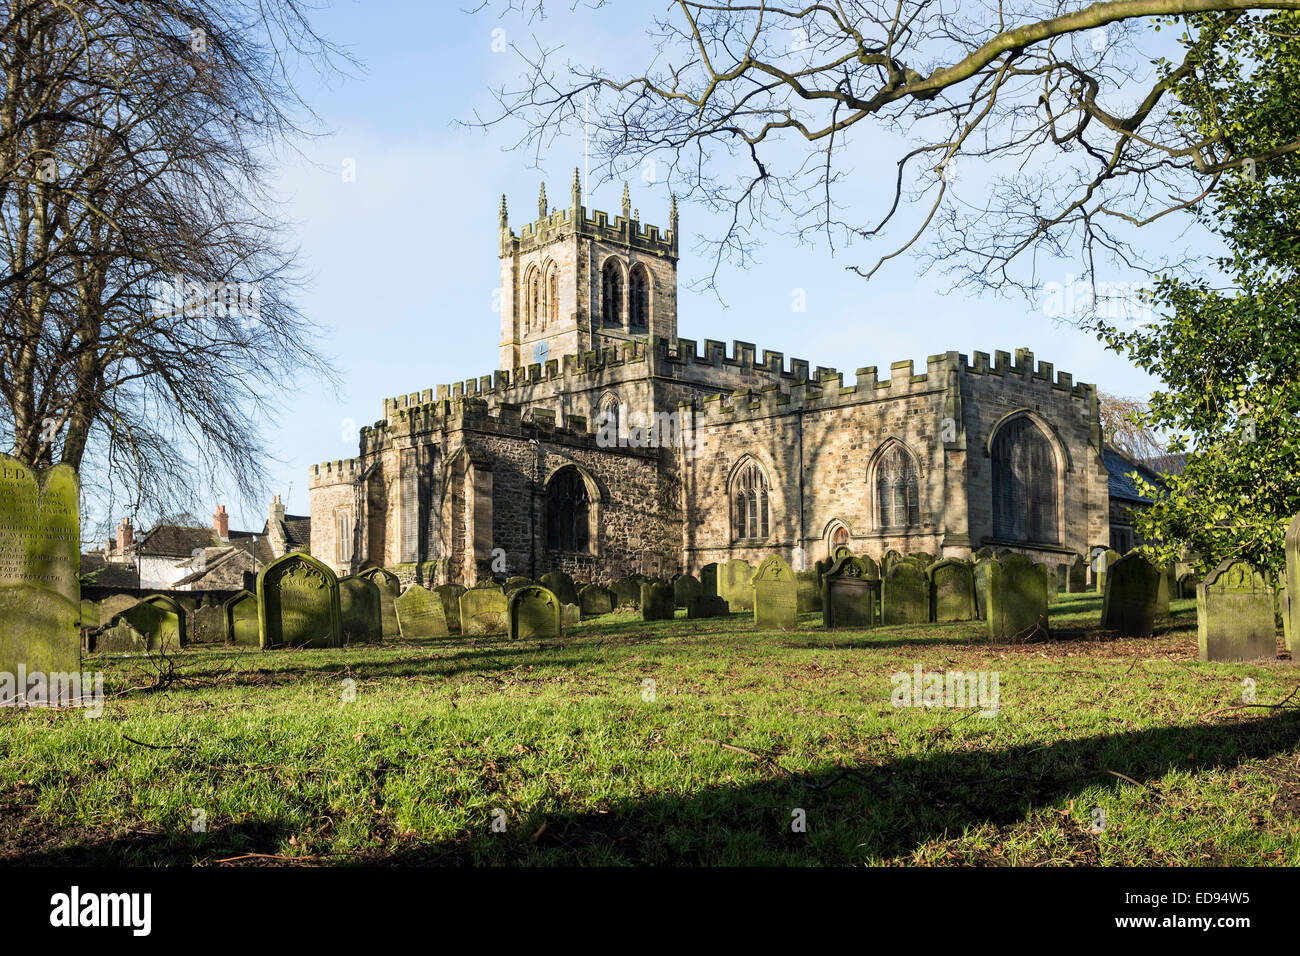 St Mary's C of E Church and Graveyard, Newgate Barnard Castle Teesdale County Durham UK Stock Photo